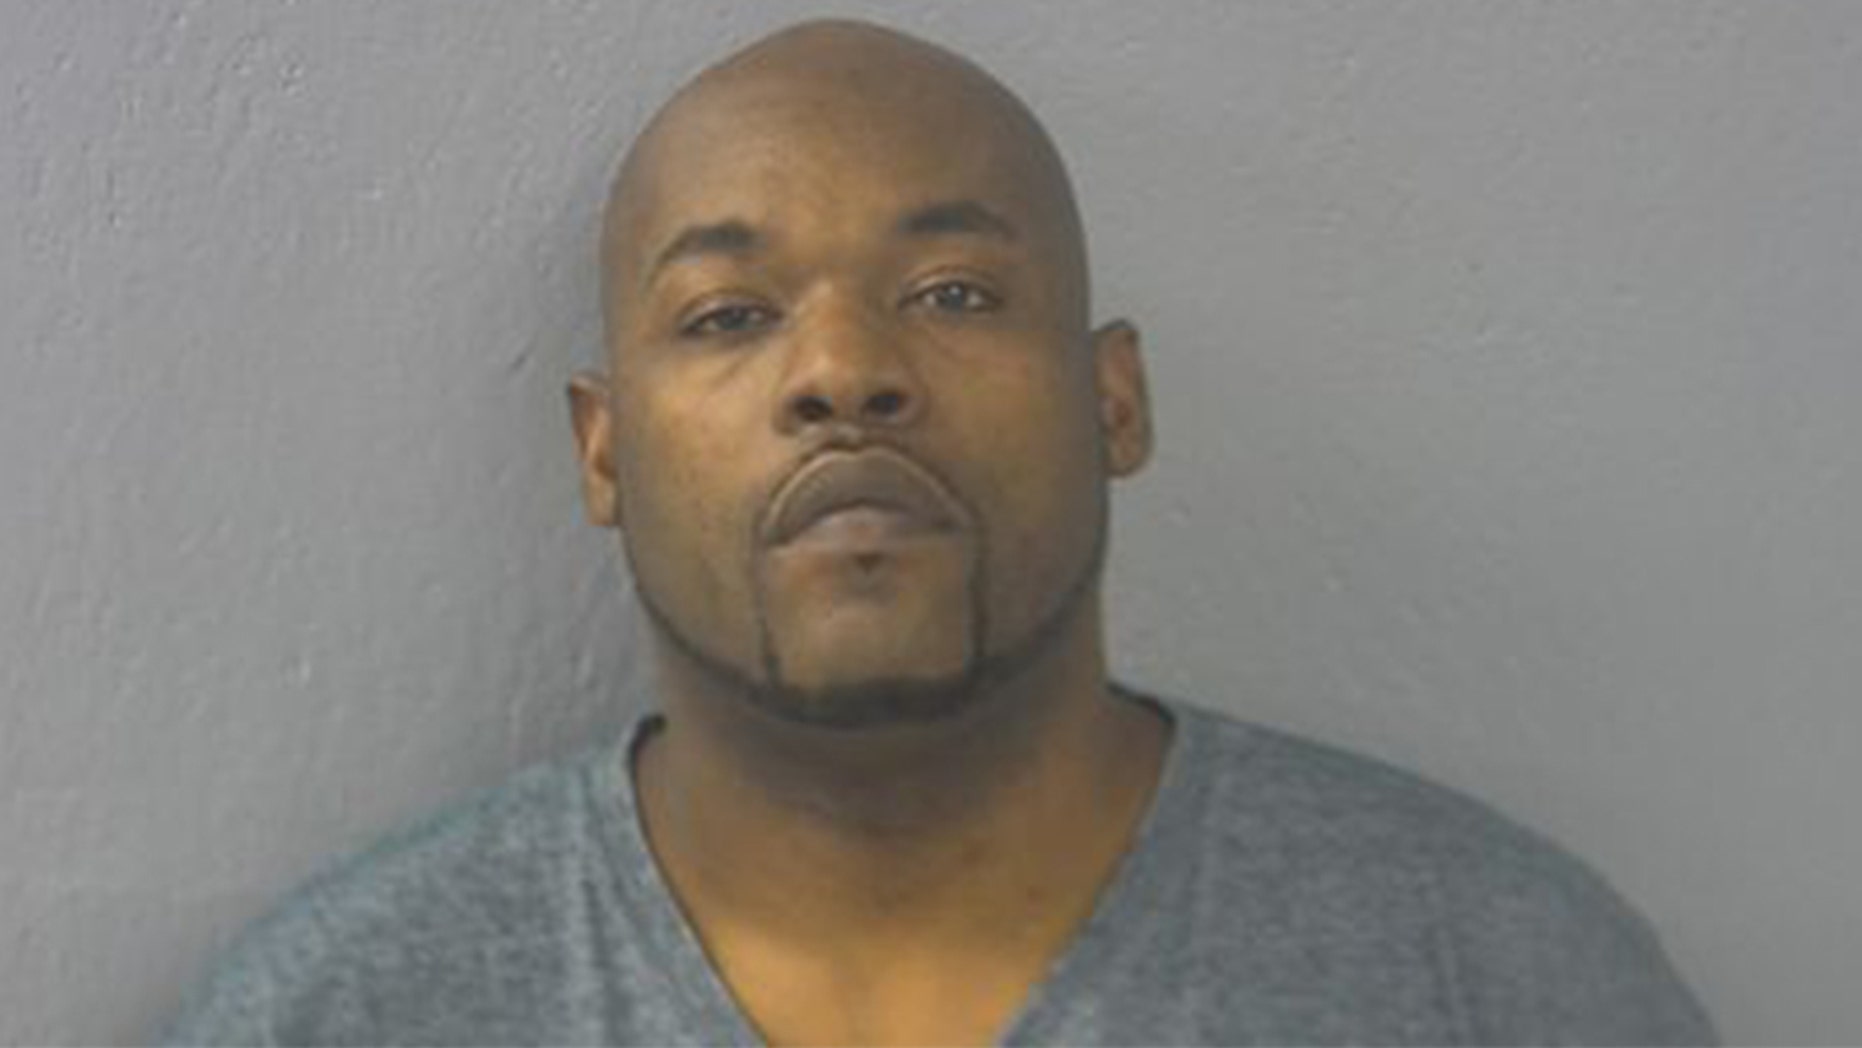 Marcus Price, 36, is facing two felony charges and the possibility of life in prison after authorities say he had unprotected sex with a woman in March 2018 and failed to tell her he was HIV positive.